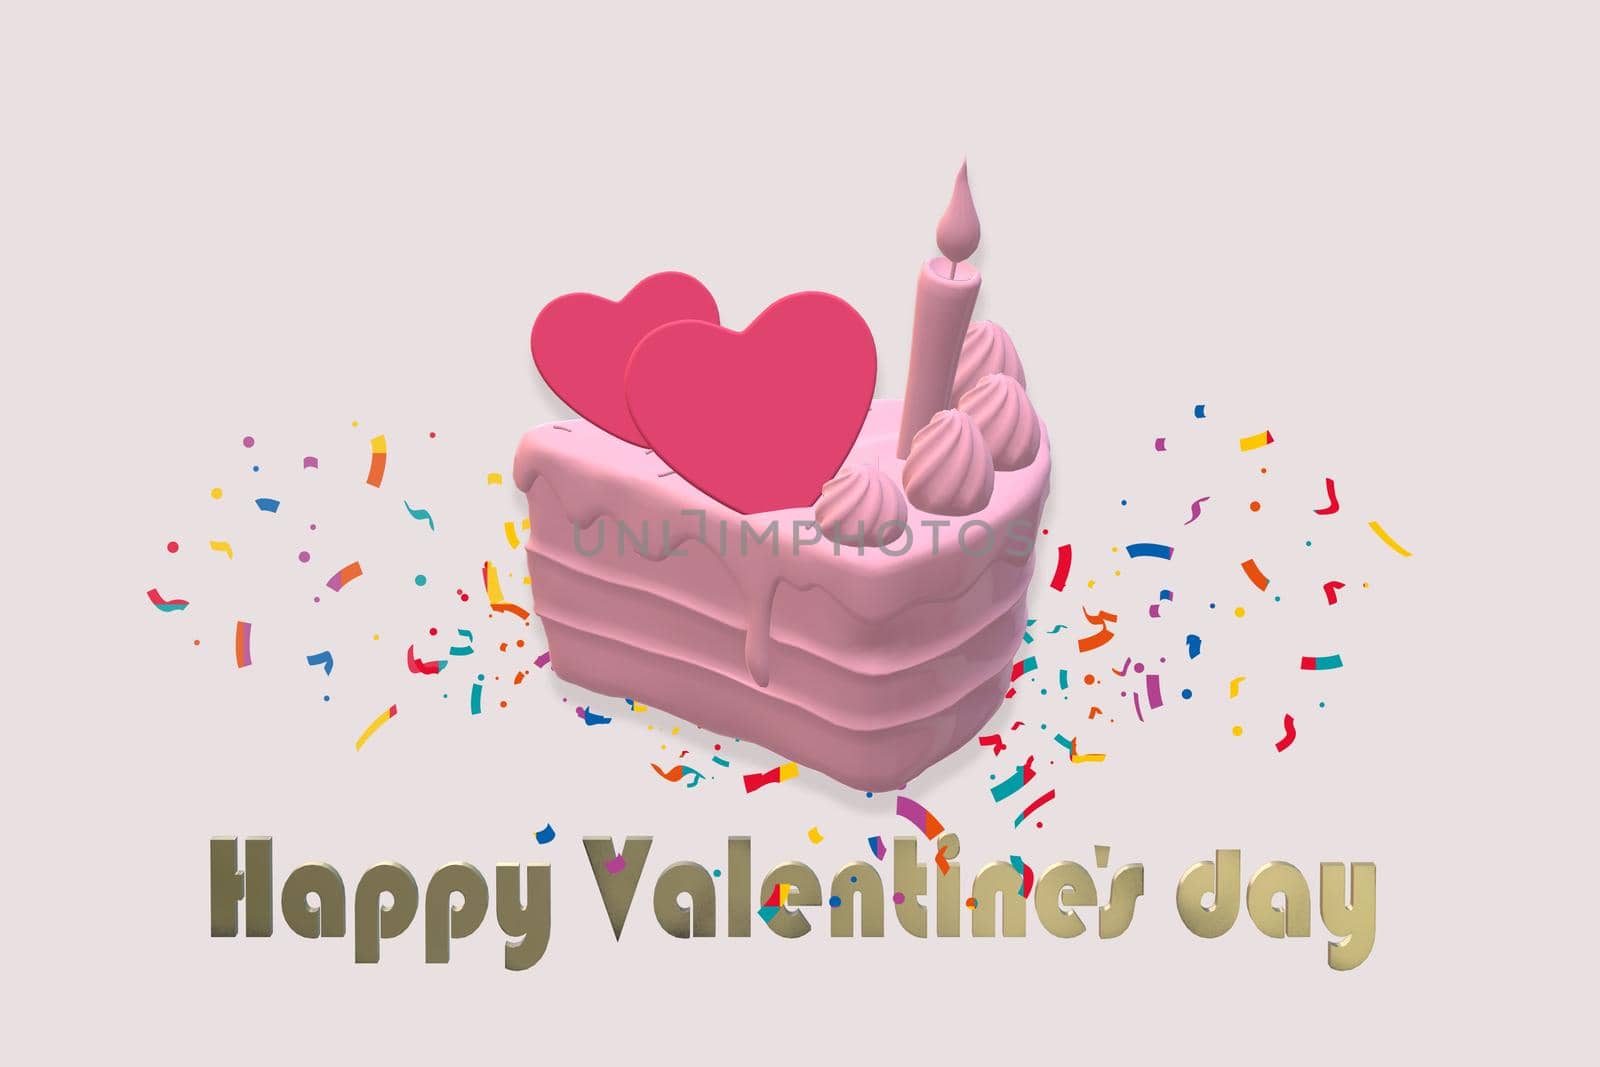 Valentines day card with cupcake by NelliPolk